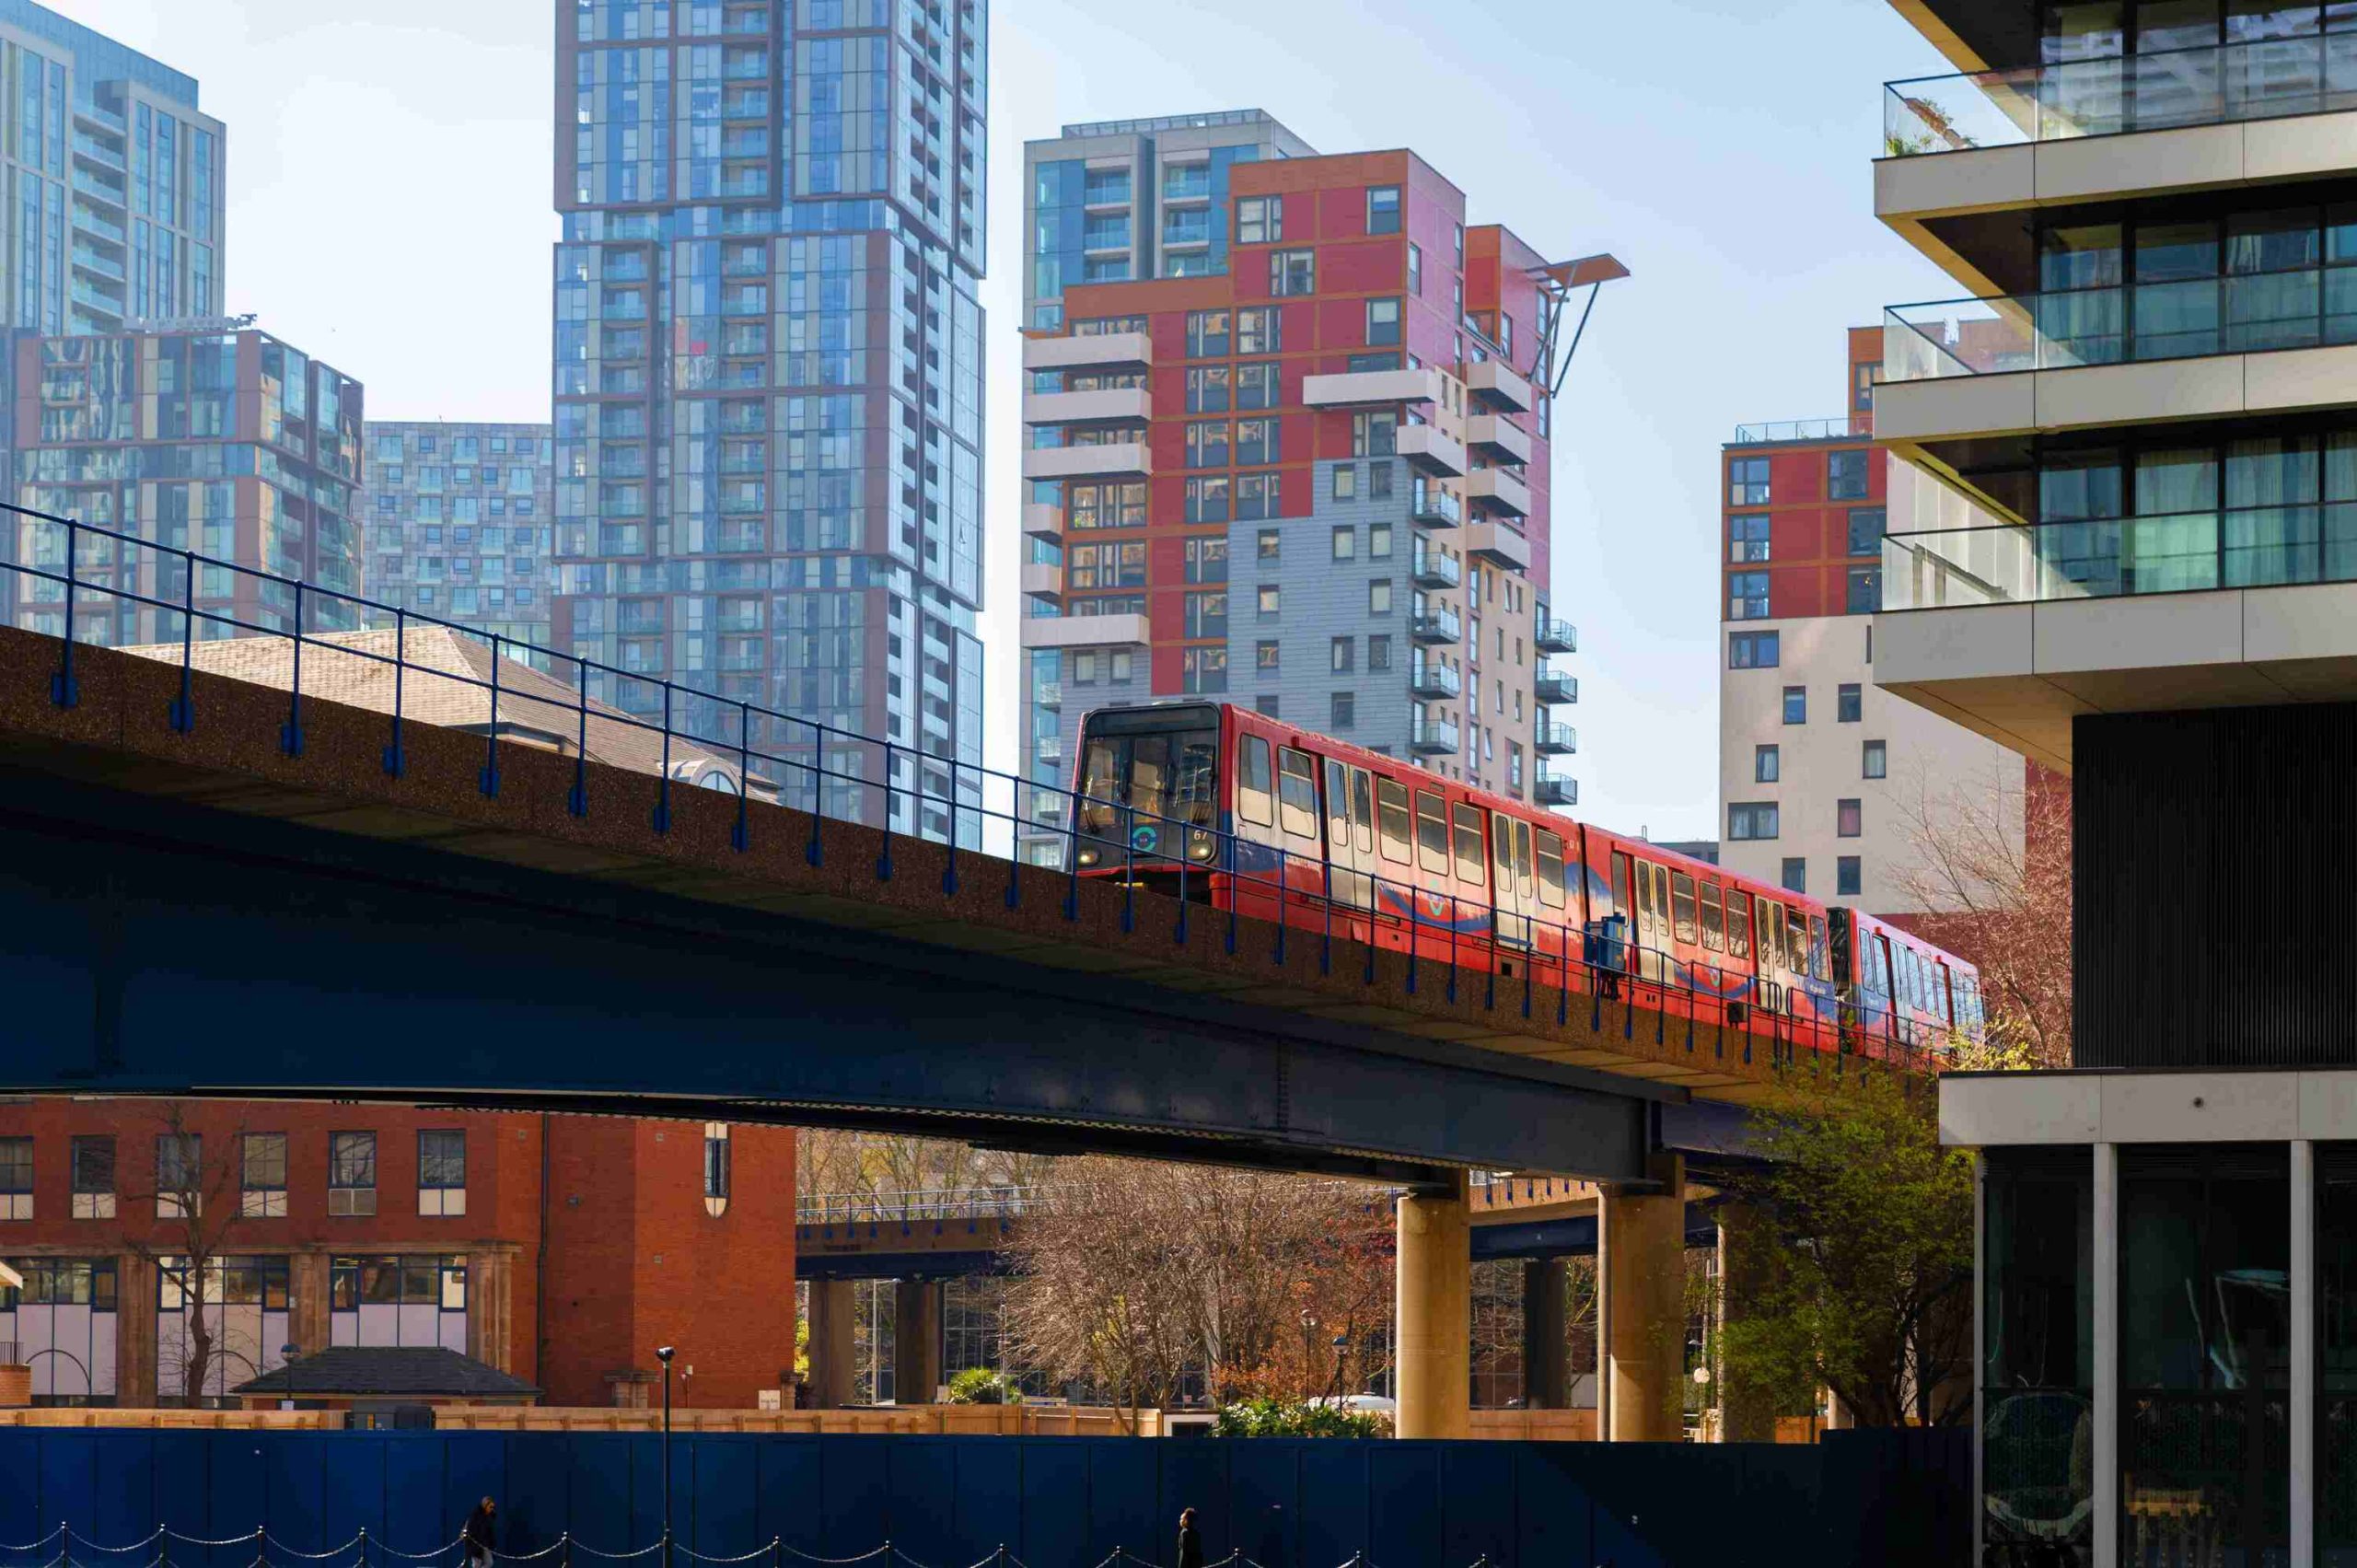 tfl-has-revealed-official-plans-to-extend-the-dlr